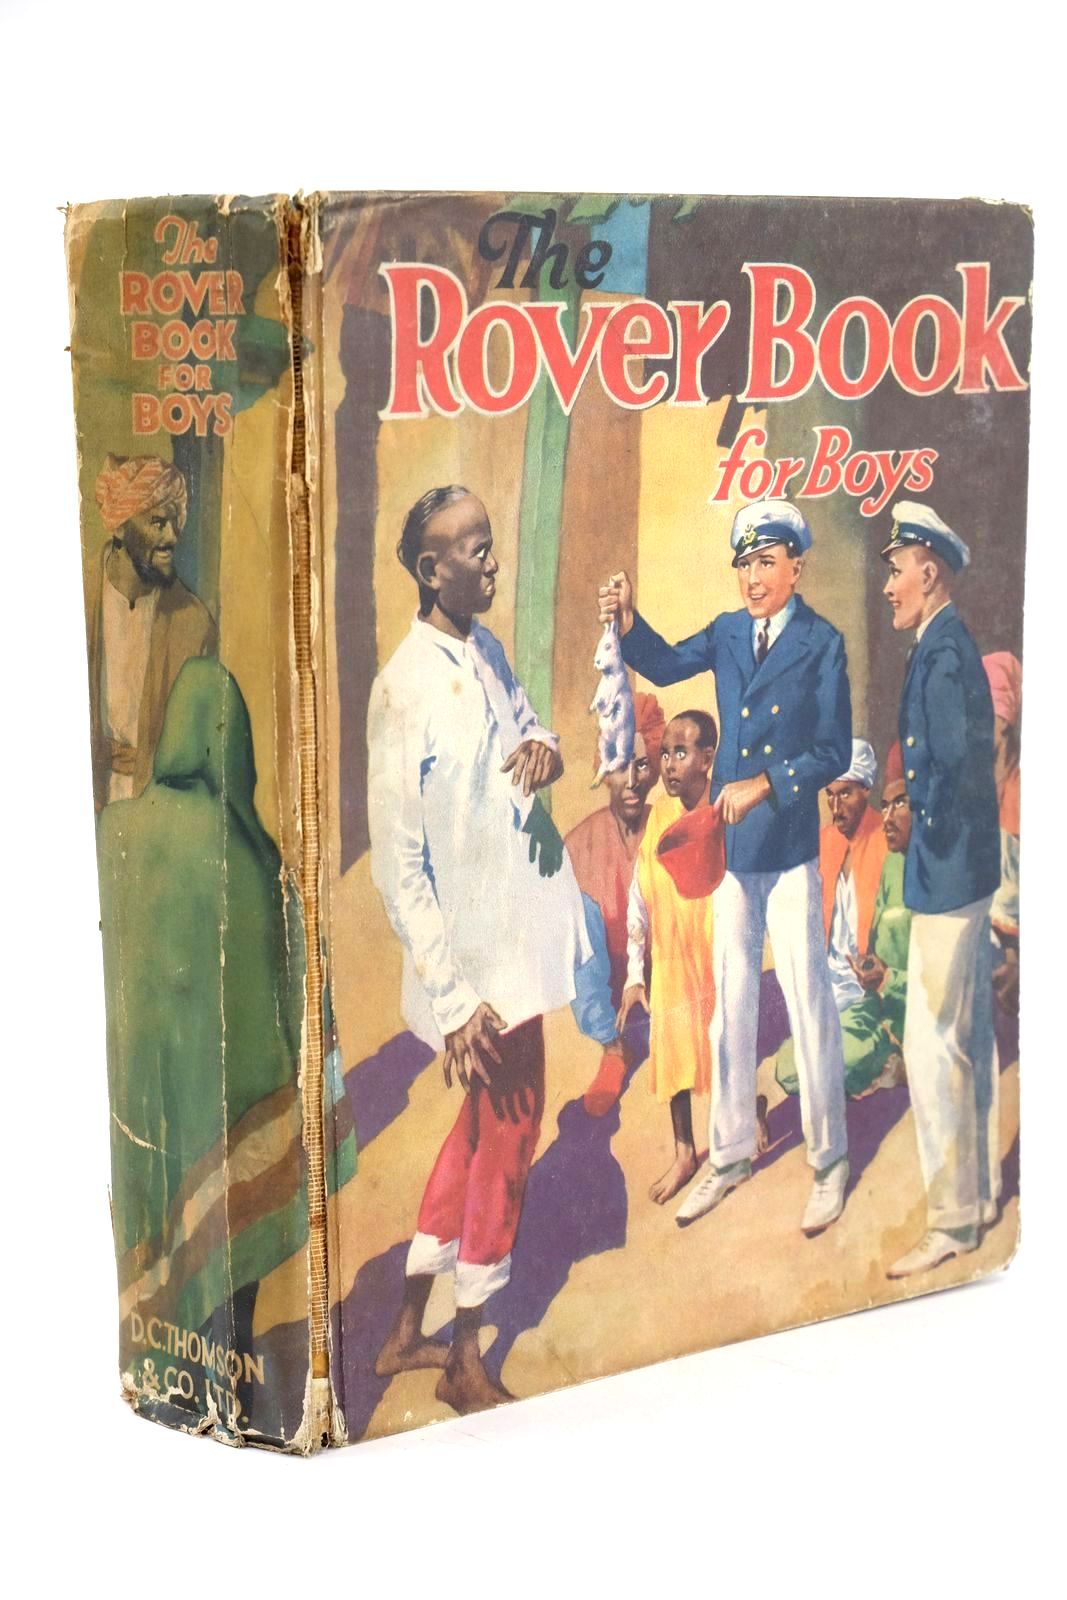 Photo of THE ROVER BOOK FOR BOYS 1934 written by Hayward, Norton
Robertson, J.G.
et al, published by D.C. Thomson & Co Ltd. (STOCK CODE: 1324789)  for sale by Stella & Rose's Books